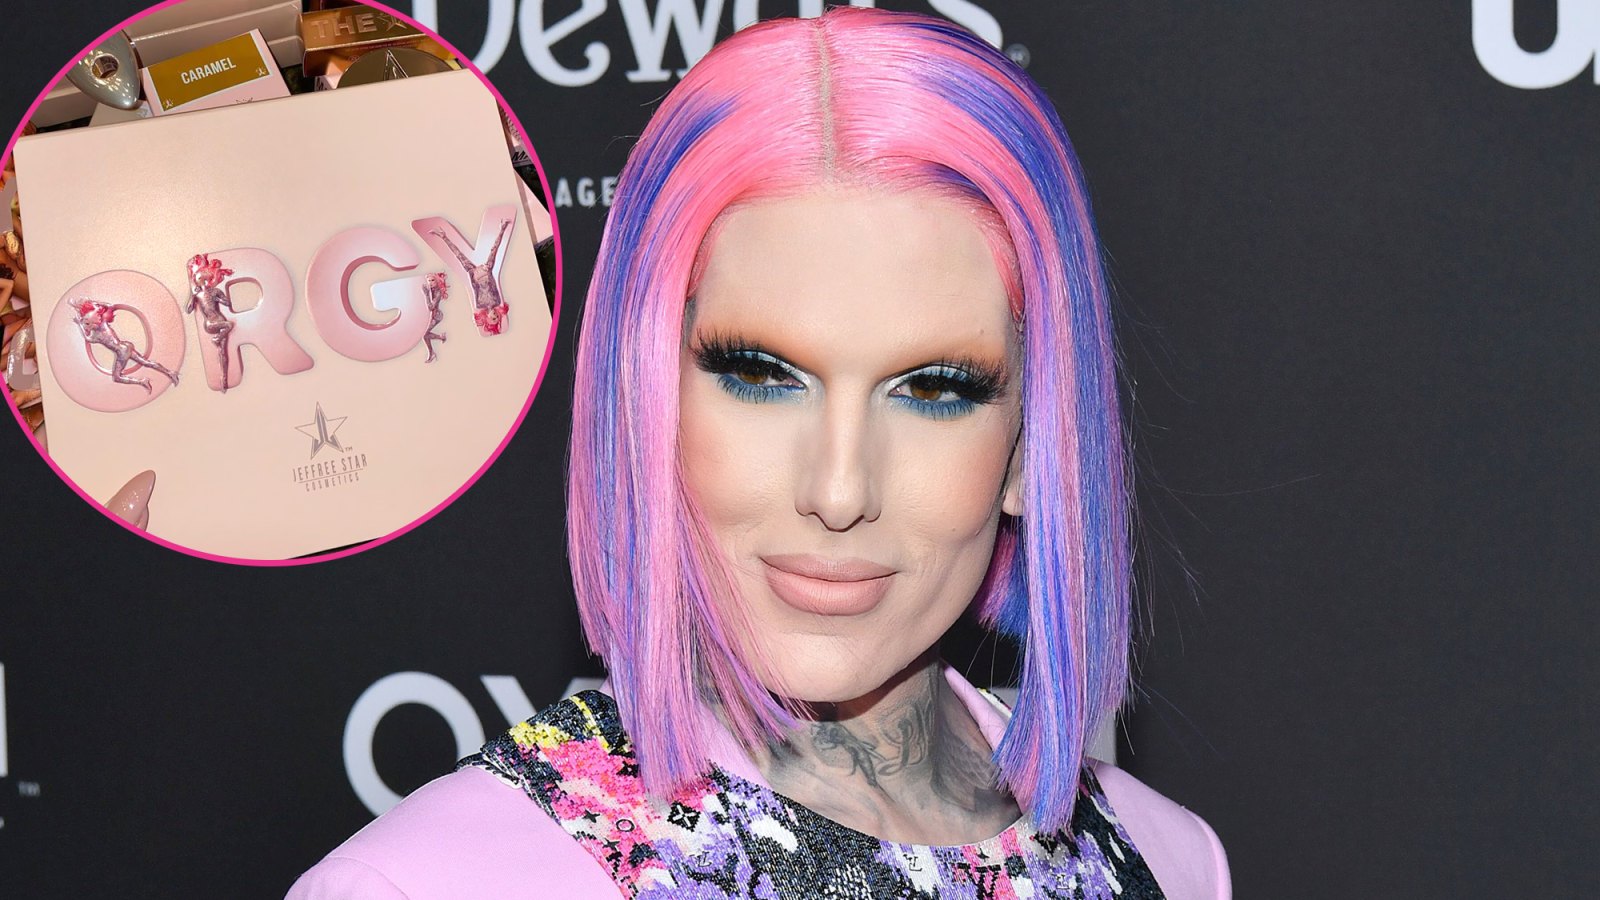 Jeffree Star’s New Orgy Makeup Collection Draws Mixed Reactions on Social Media